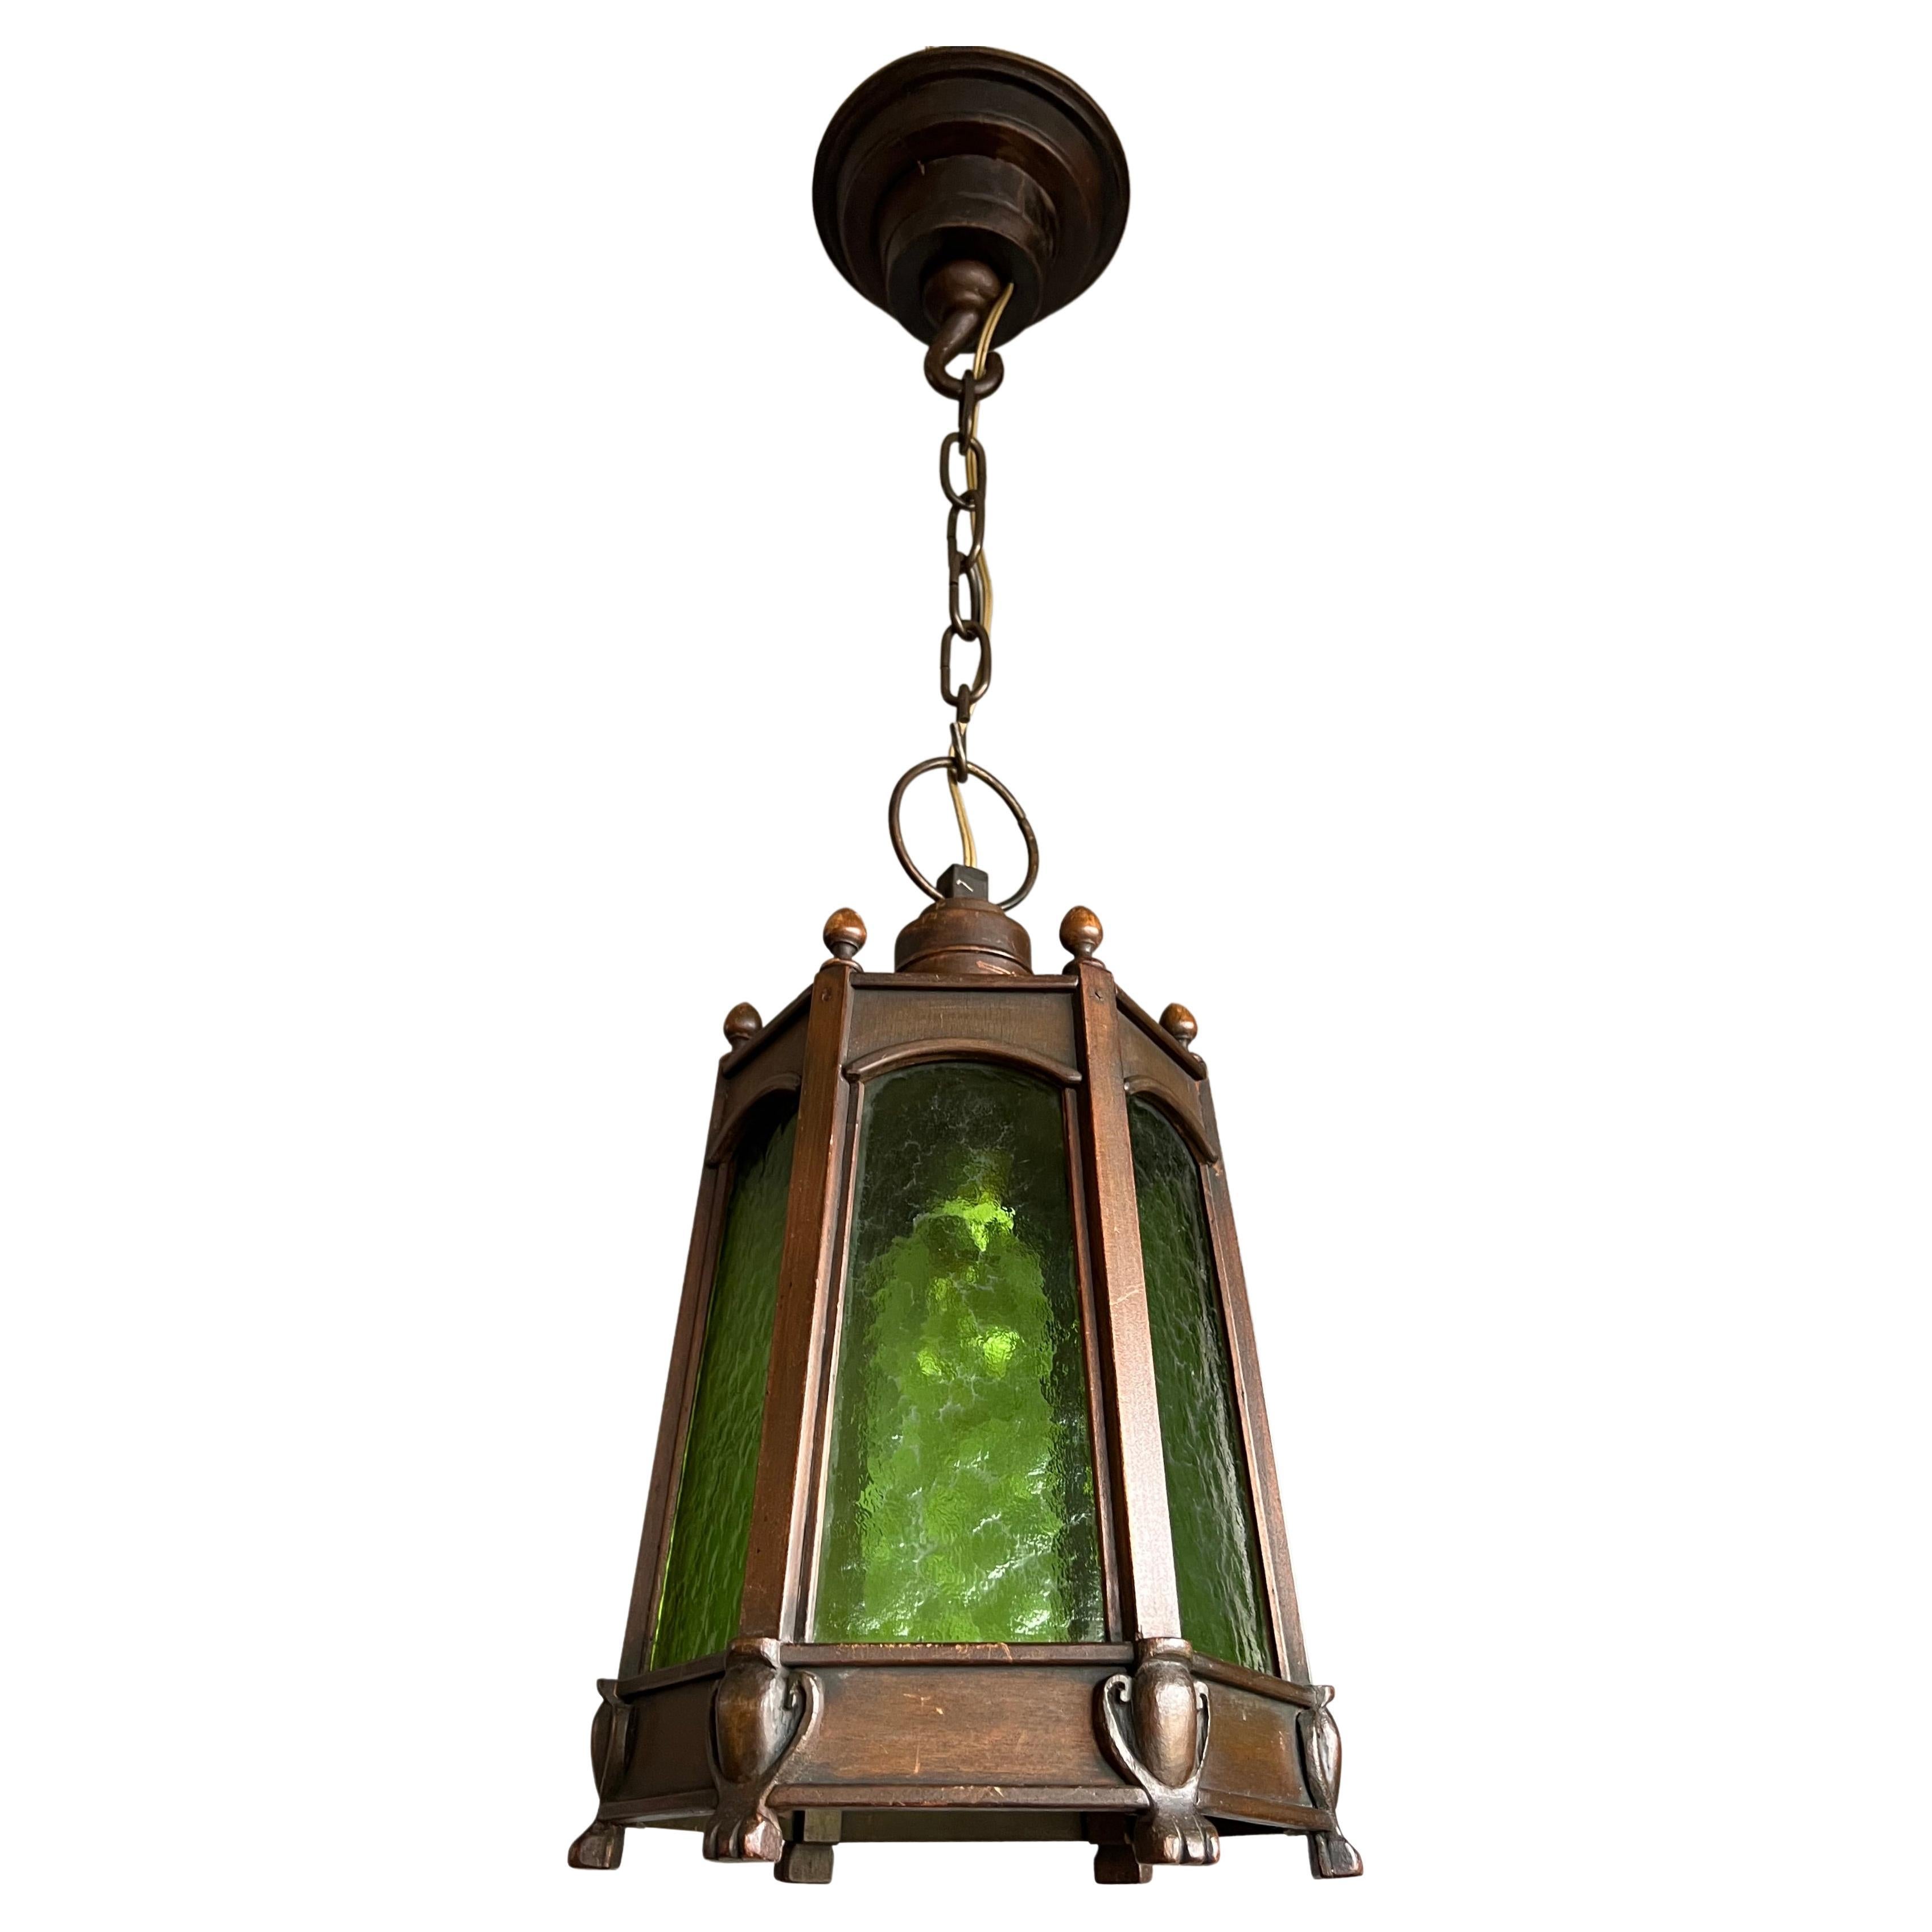 Rare Arts & Crafts Wooden Entrance or Hallway Pendant Light With Green Art Glass